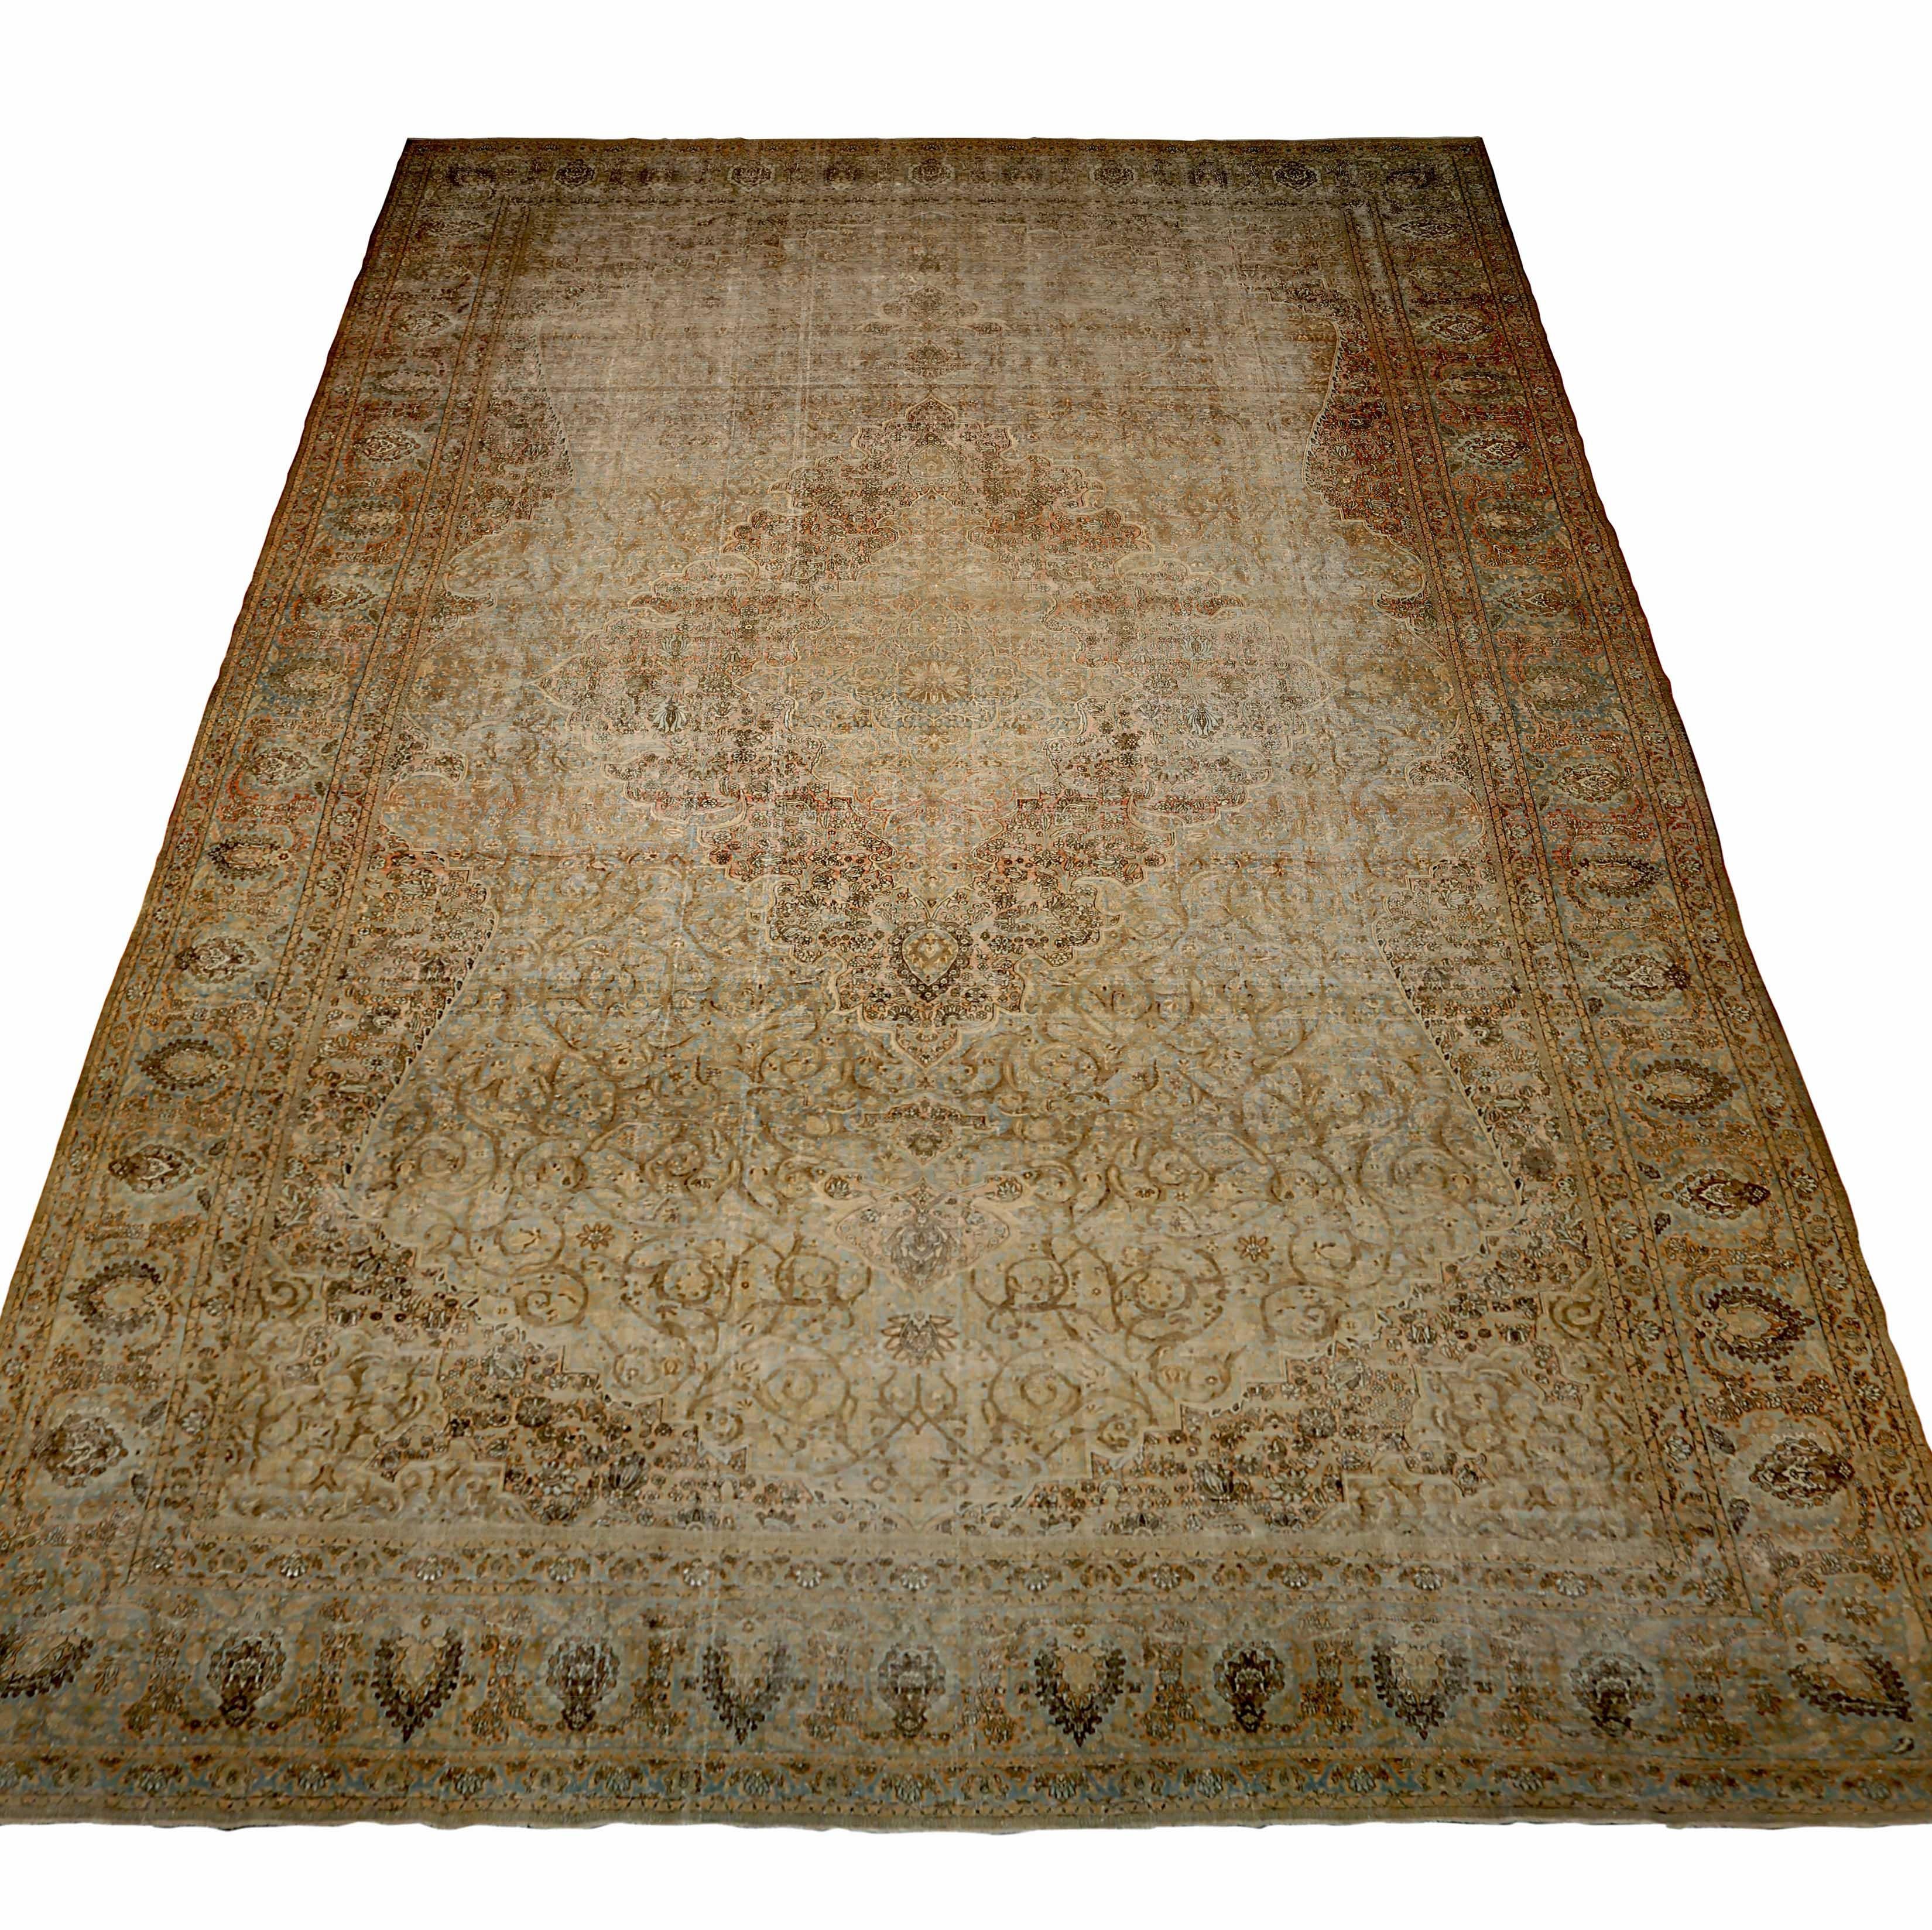 Antique Persian area rug handwoven from the finest sheep’s wool. It’s colored with all-natural vegetable dyes that are safe for humans and pets. It’s a traditional Kashan design handwoven by expert artisans. It’s a lovely area rug that can be